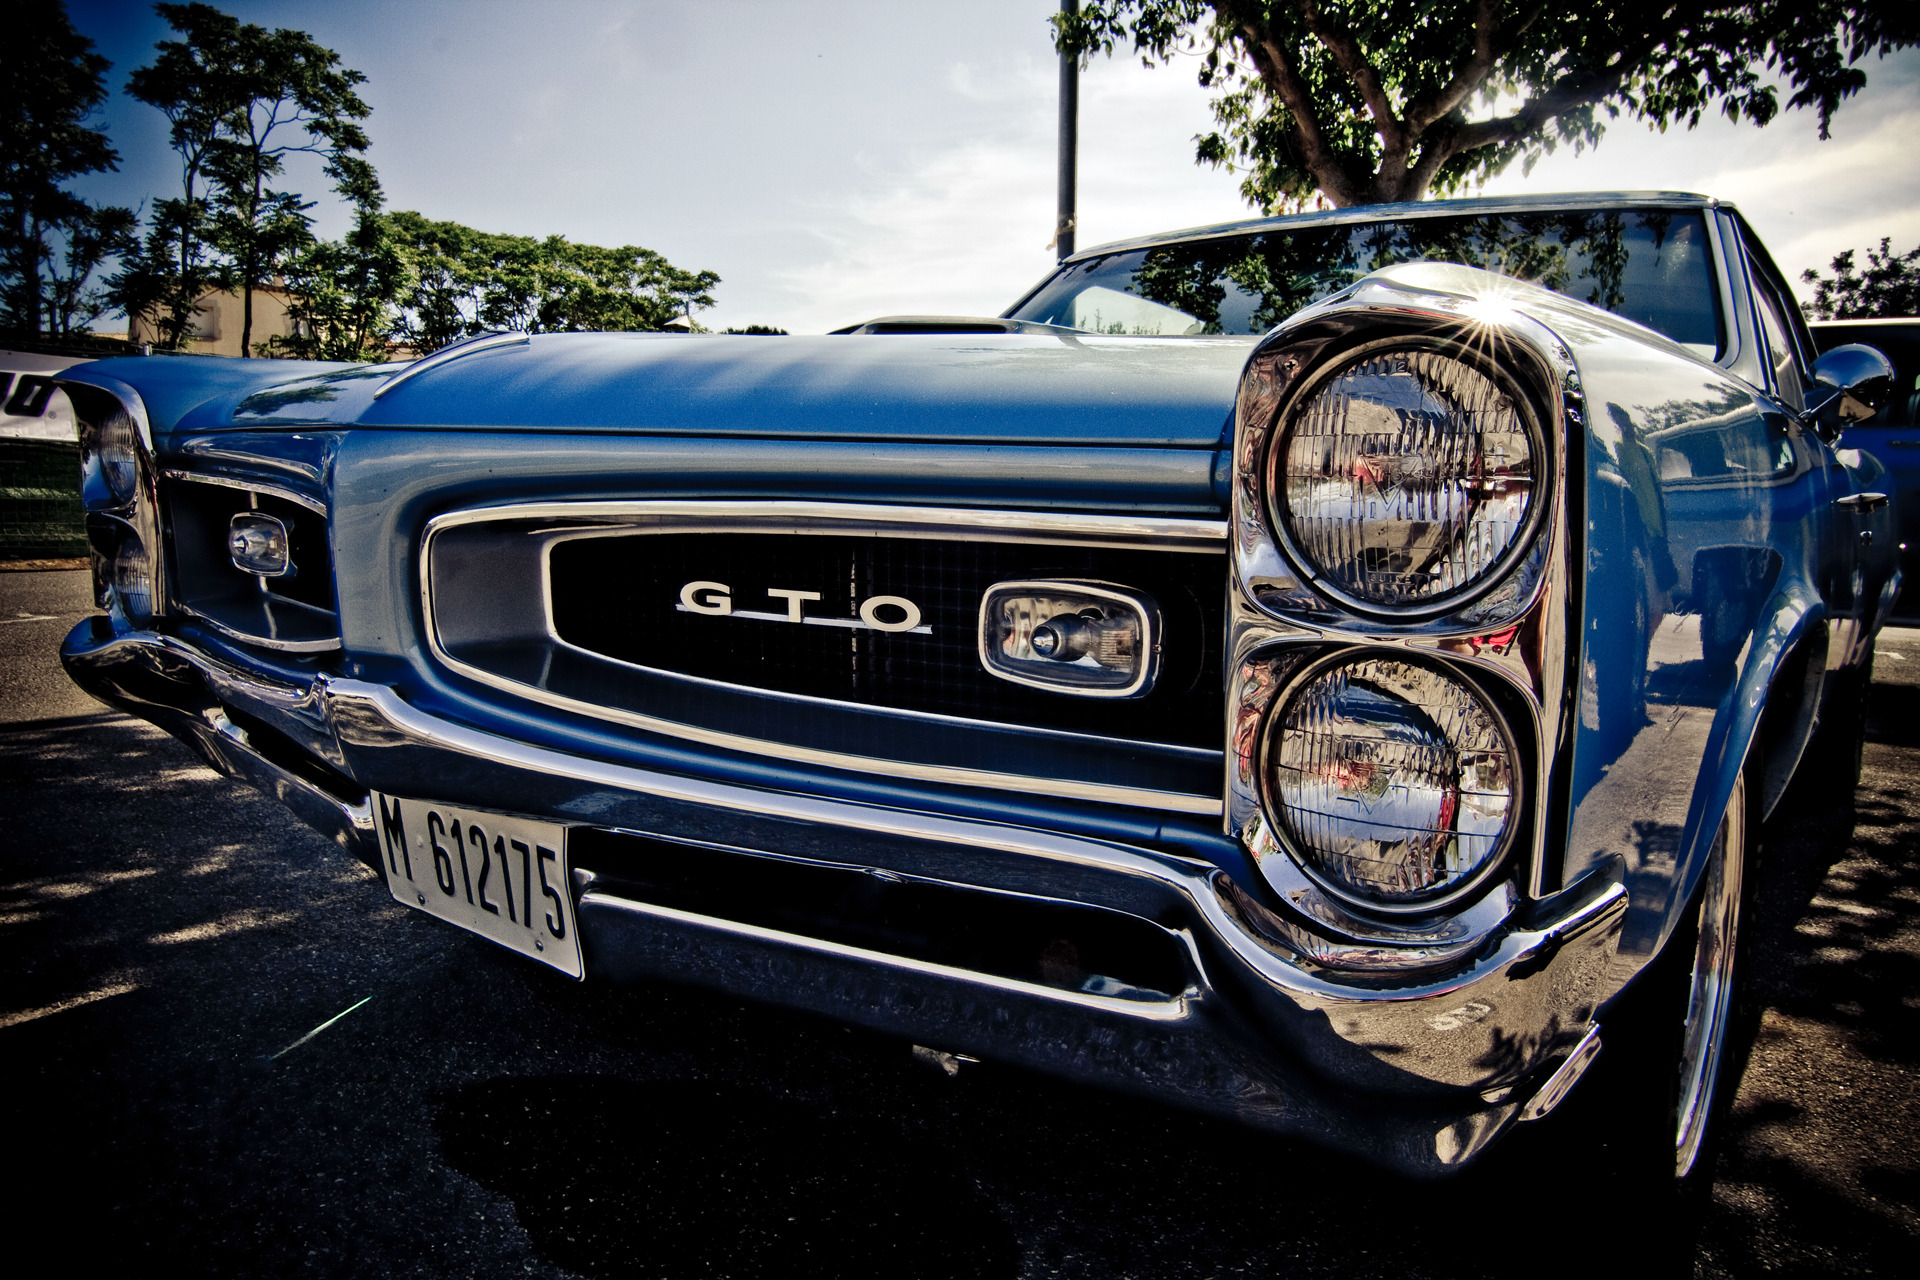 Wallpaper Pontiac Gto Muscle Car Pictures And Photos